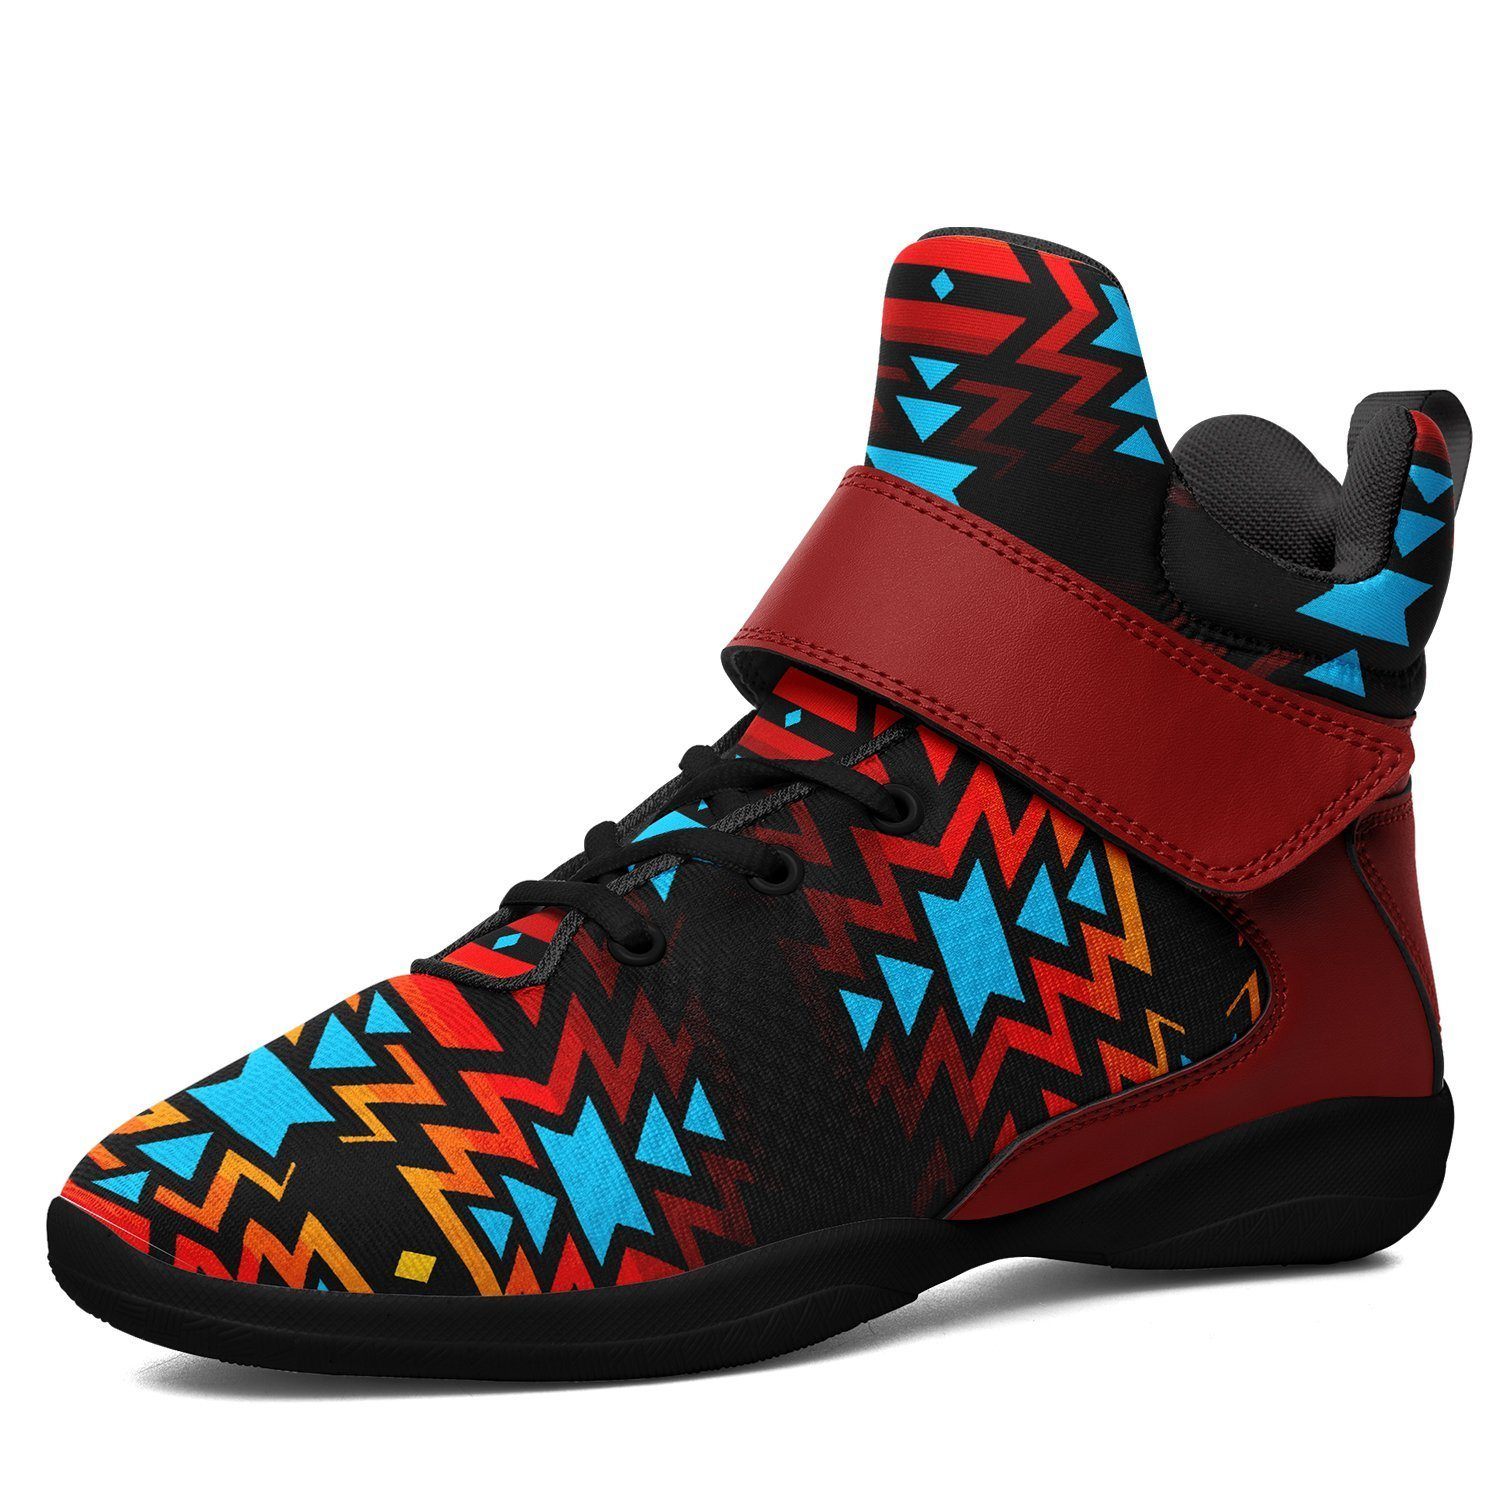 Black Fire and Turquoise Kid's Ipottaa Basketball / Sport High Top Shoes 49 Dzine US Child 12.5 / EUR 30 Black Sole with Dark Red Strap 